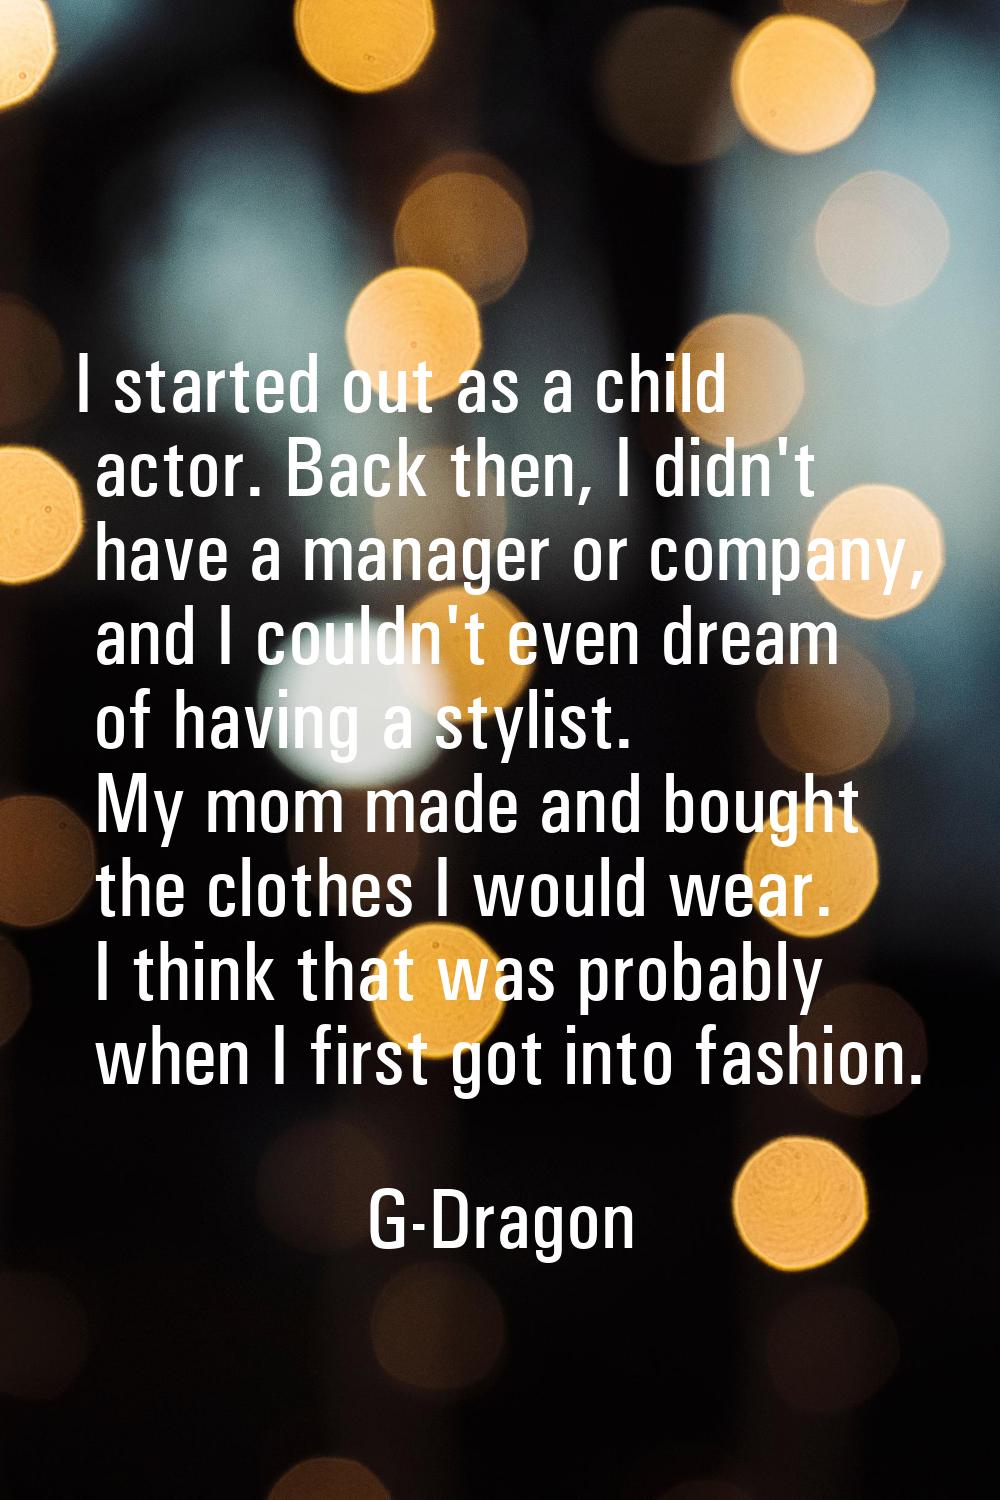 I started out as a child actor. Back then, I didn't have a manager or company, and I couldn't even 